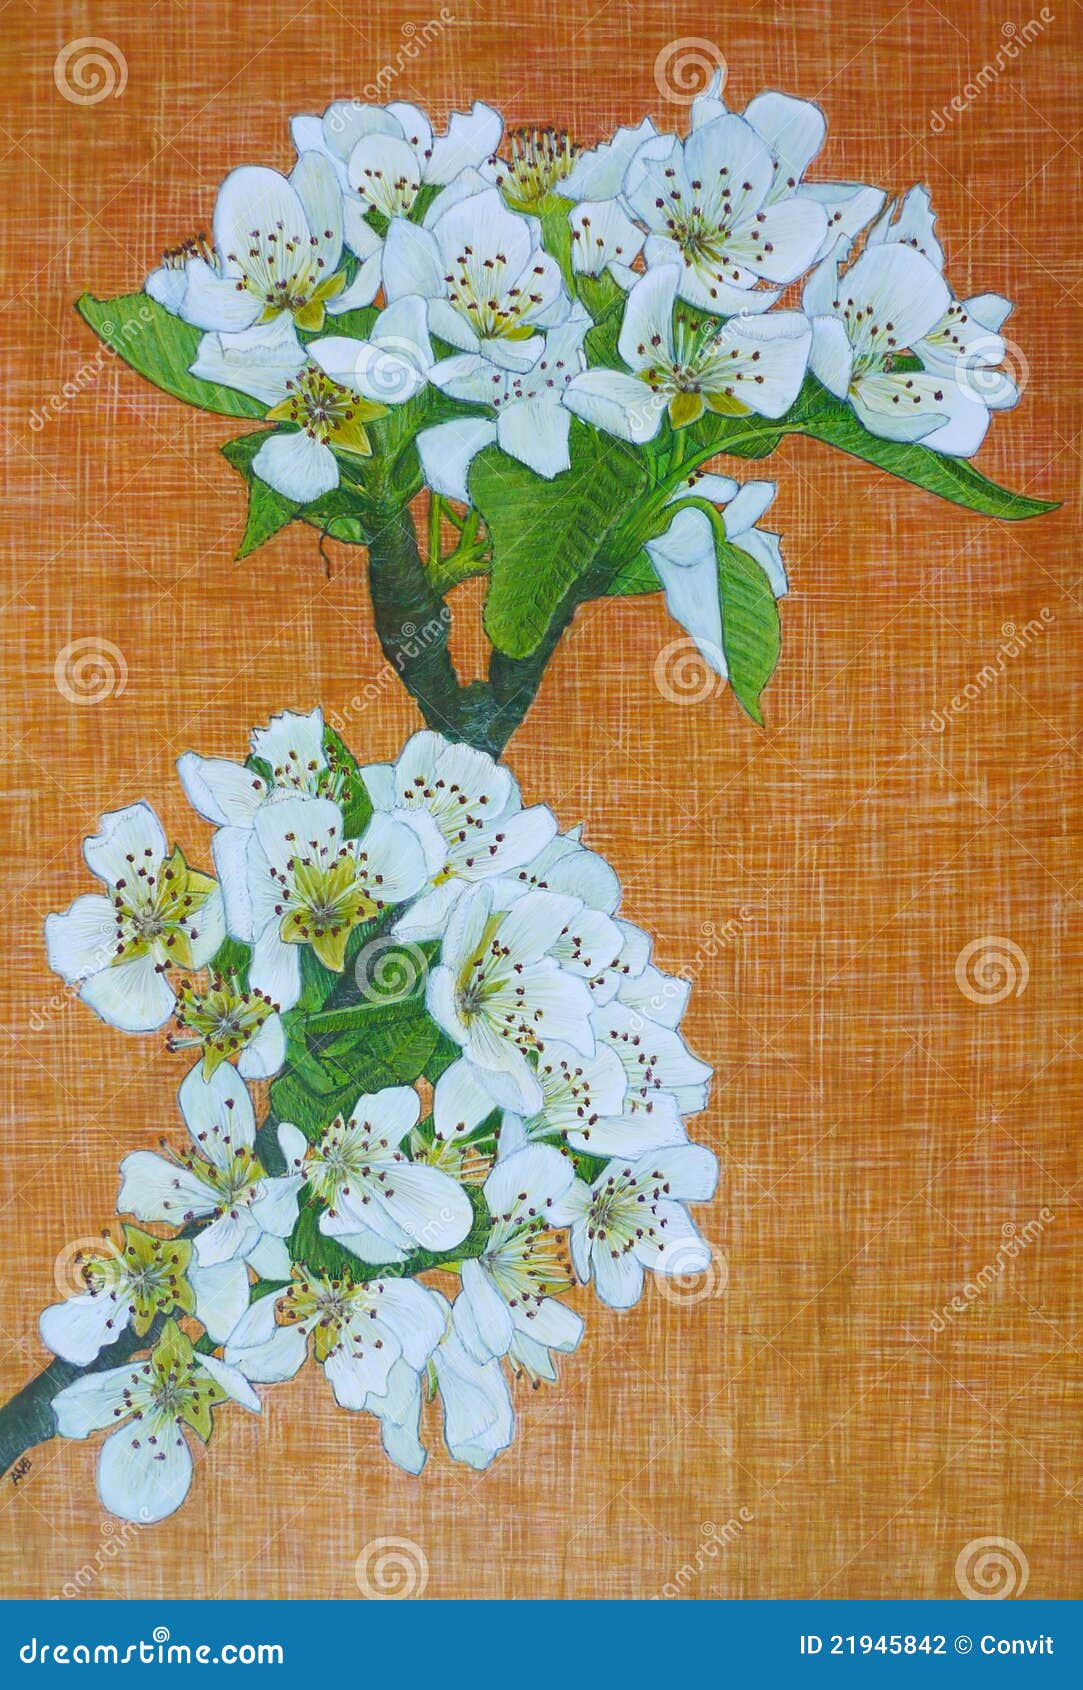 egg tempera painting of pear blossom